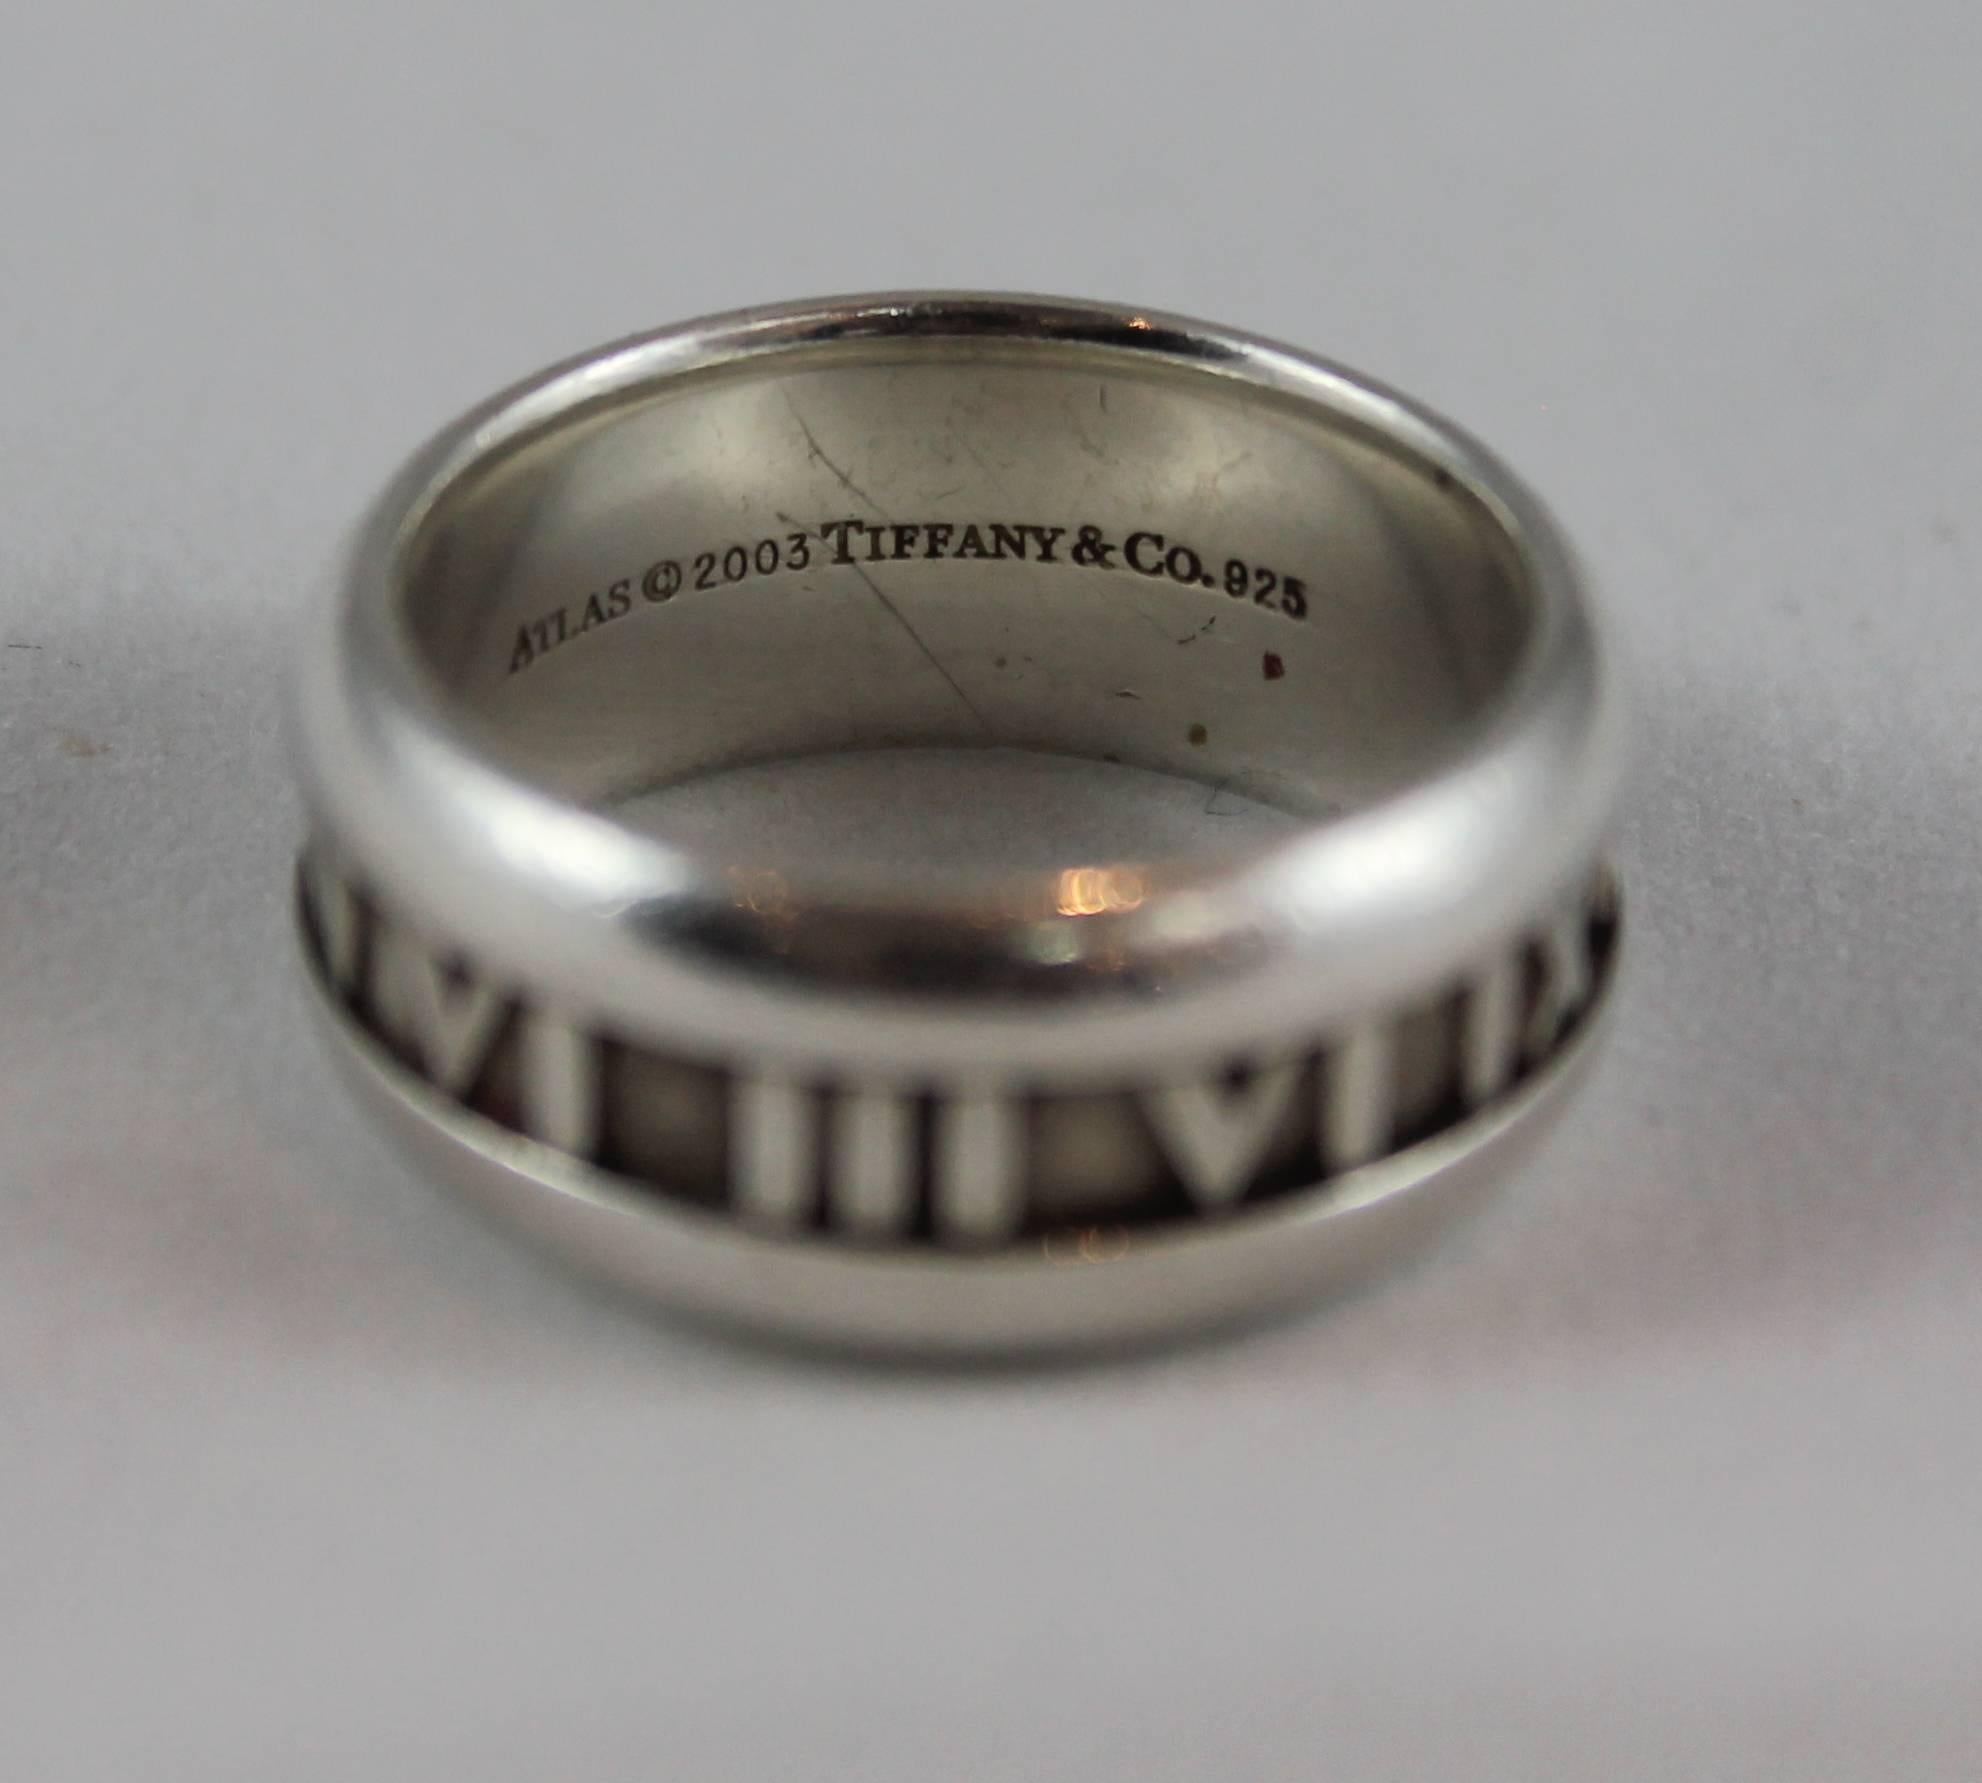 Tiffany & Co. Sterling Silver Atlas Ring - 9 - 2003. This ring is in very good condition with some wear consisting of darkening between the Roman numerals. The ring is a size 9 and there is a matching thing Atlas cuff available.

Width- 0.4